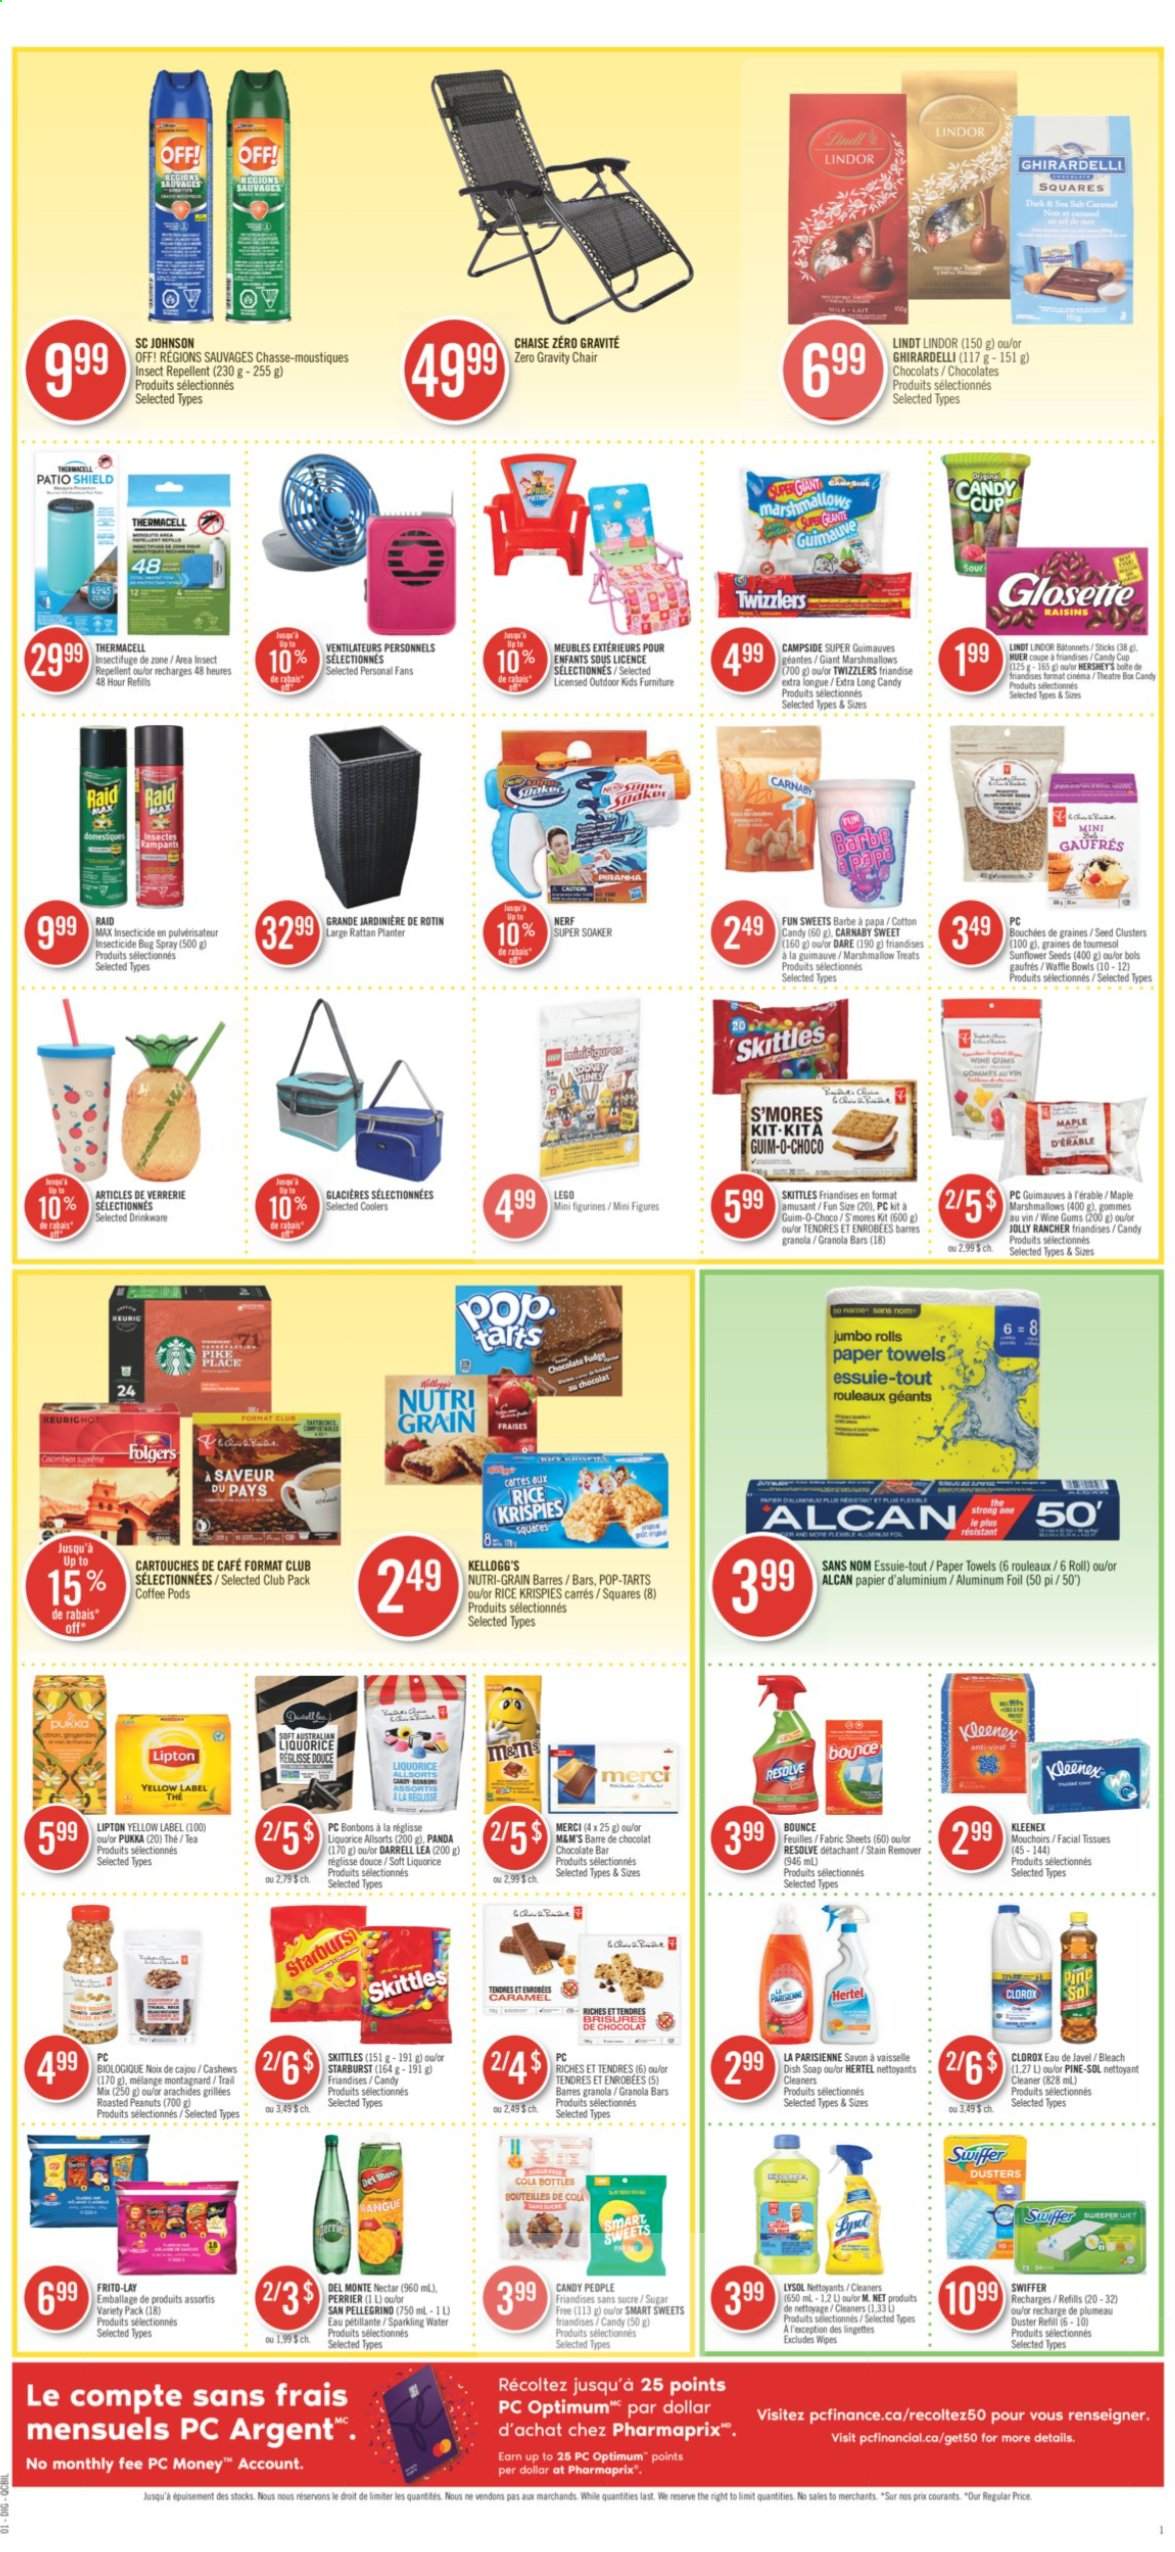 thumbnail - Pharmaprix Flyer - June 12, 2021 - June 18, 2021 - Sales products - Hershey's, marshmallows, Kellogg's, Merci, Skittles, Pop-Tarts, Ghirardelli, Starburst, chocolate bar, Frito-Lay, granola bar, Rice Krispies, Nutri-Grain, caramel, cashews, roasted peanuts, peanuts, dried fruit, Perrier, sparkling water, San Pellegrino, tea, coffee pods, Folgers, Johnson's, Kleenex, tissues, kitchen towels, paper towels, cleaner, bleach, stain remover, Lysol, Clorox, Pine-Sol, Swiffer, Bounce, soap, facial tissues, repellent, insecticide, Raid, duster, cup, aluminium foil, minifigure, soaker, panda, plant seeds, LEGO, Nerf, raisins. Page 3.